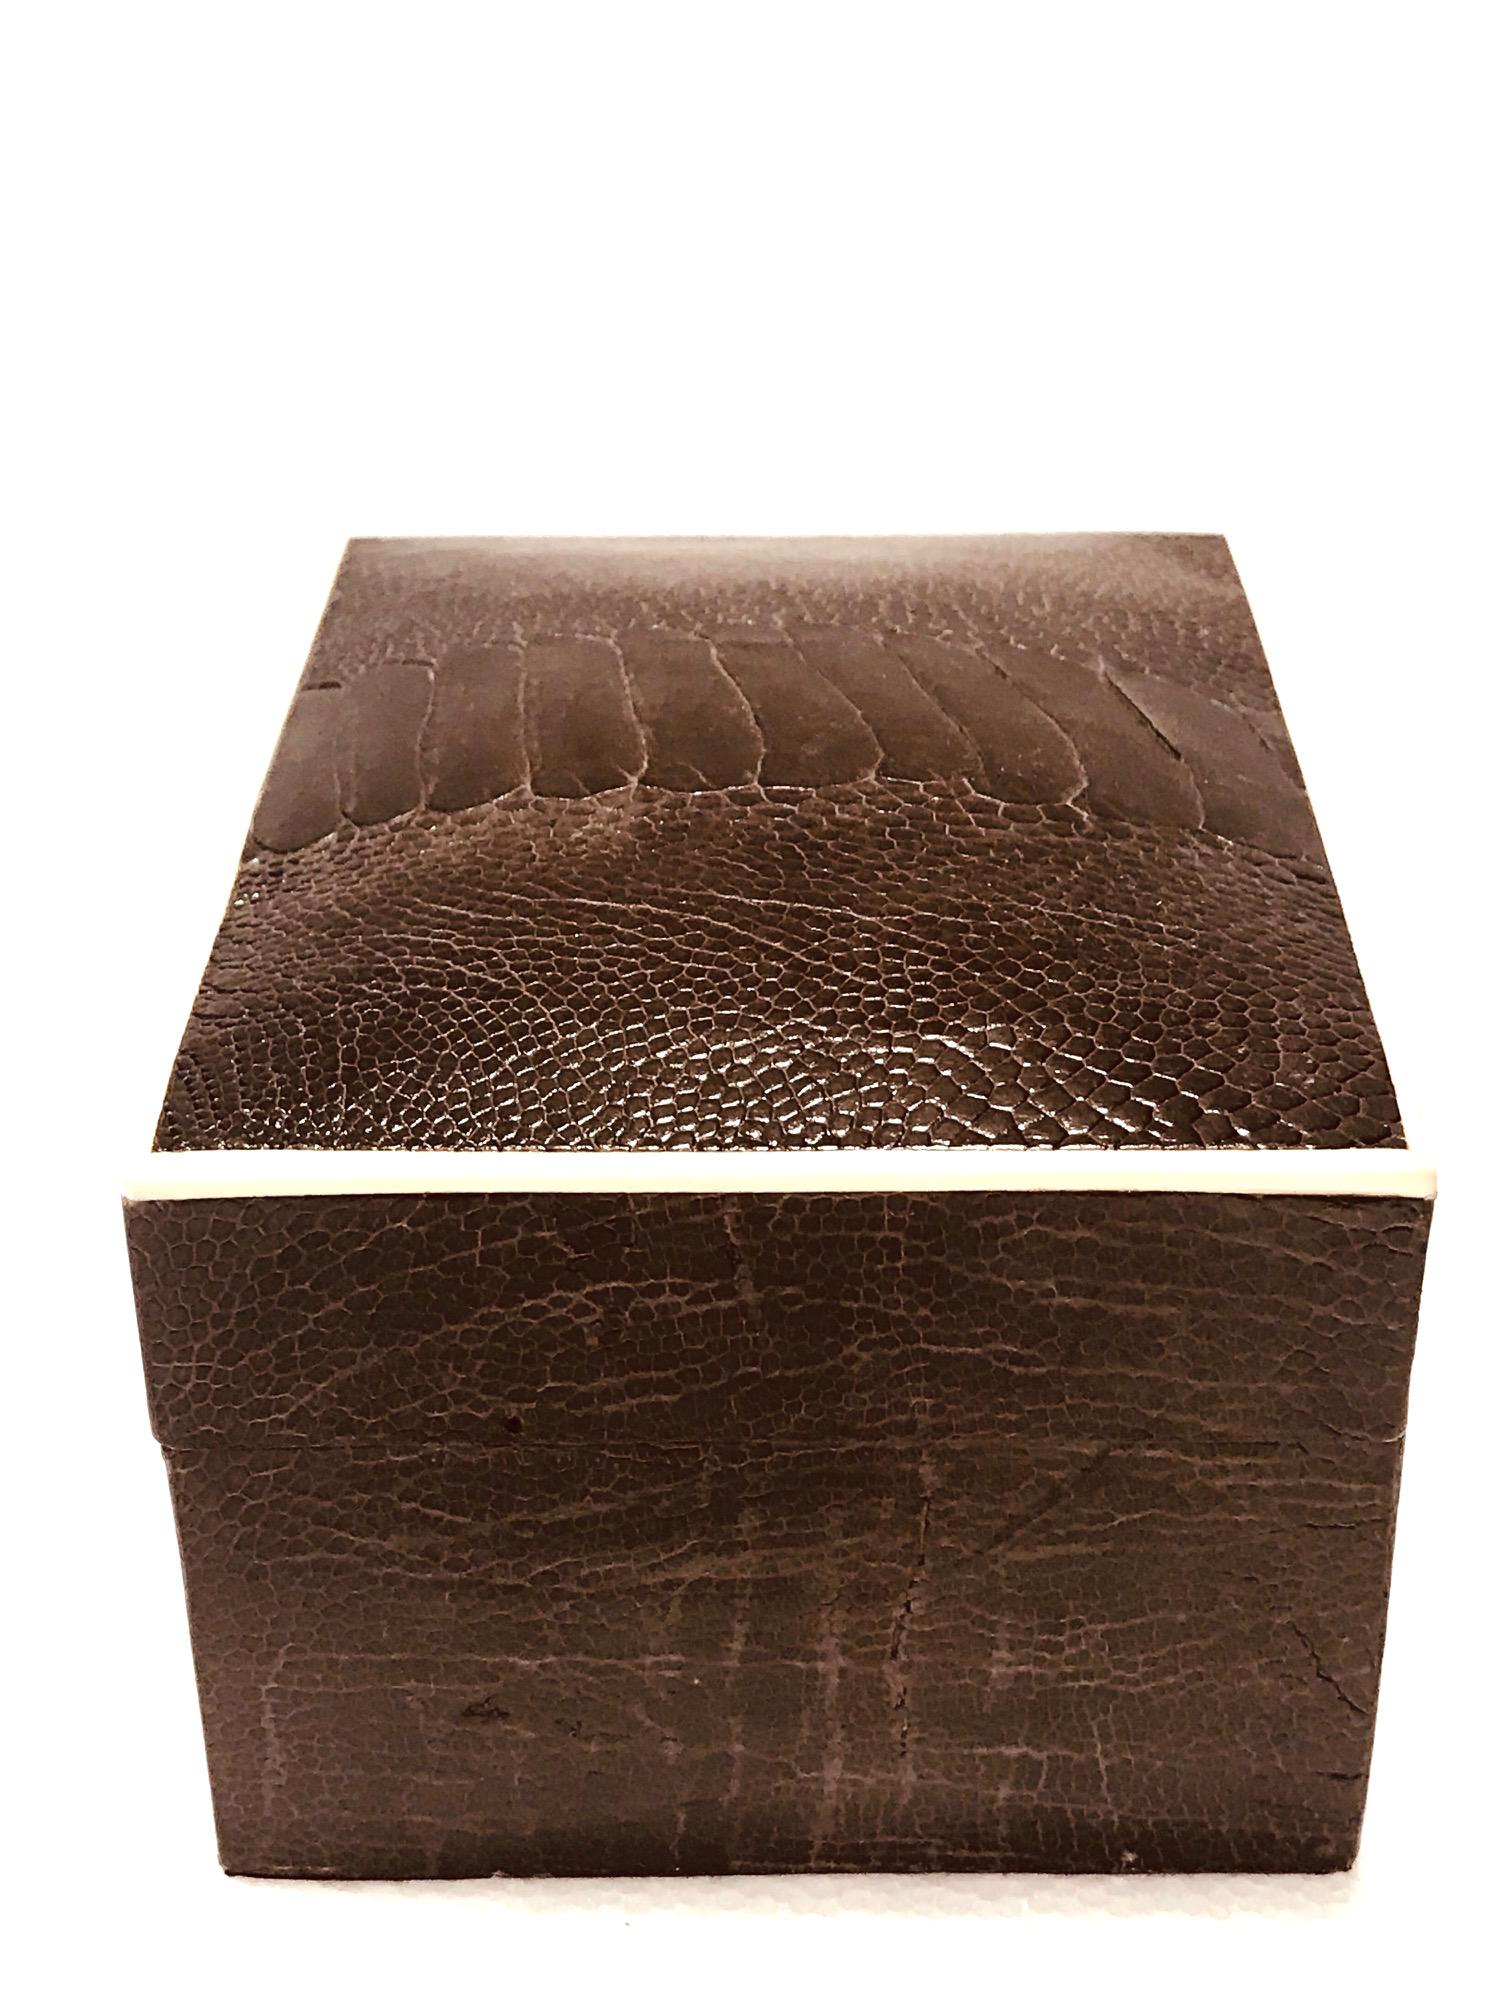 Hand-Crafted Vintage R&Y Augousti Decorative Box in Brown Ostrich Leather and Bone, c. 2000